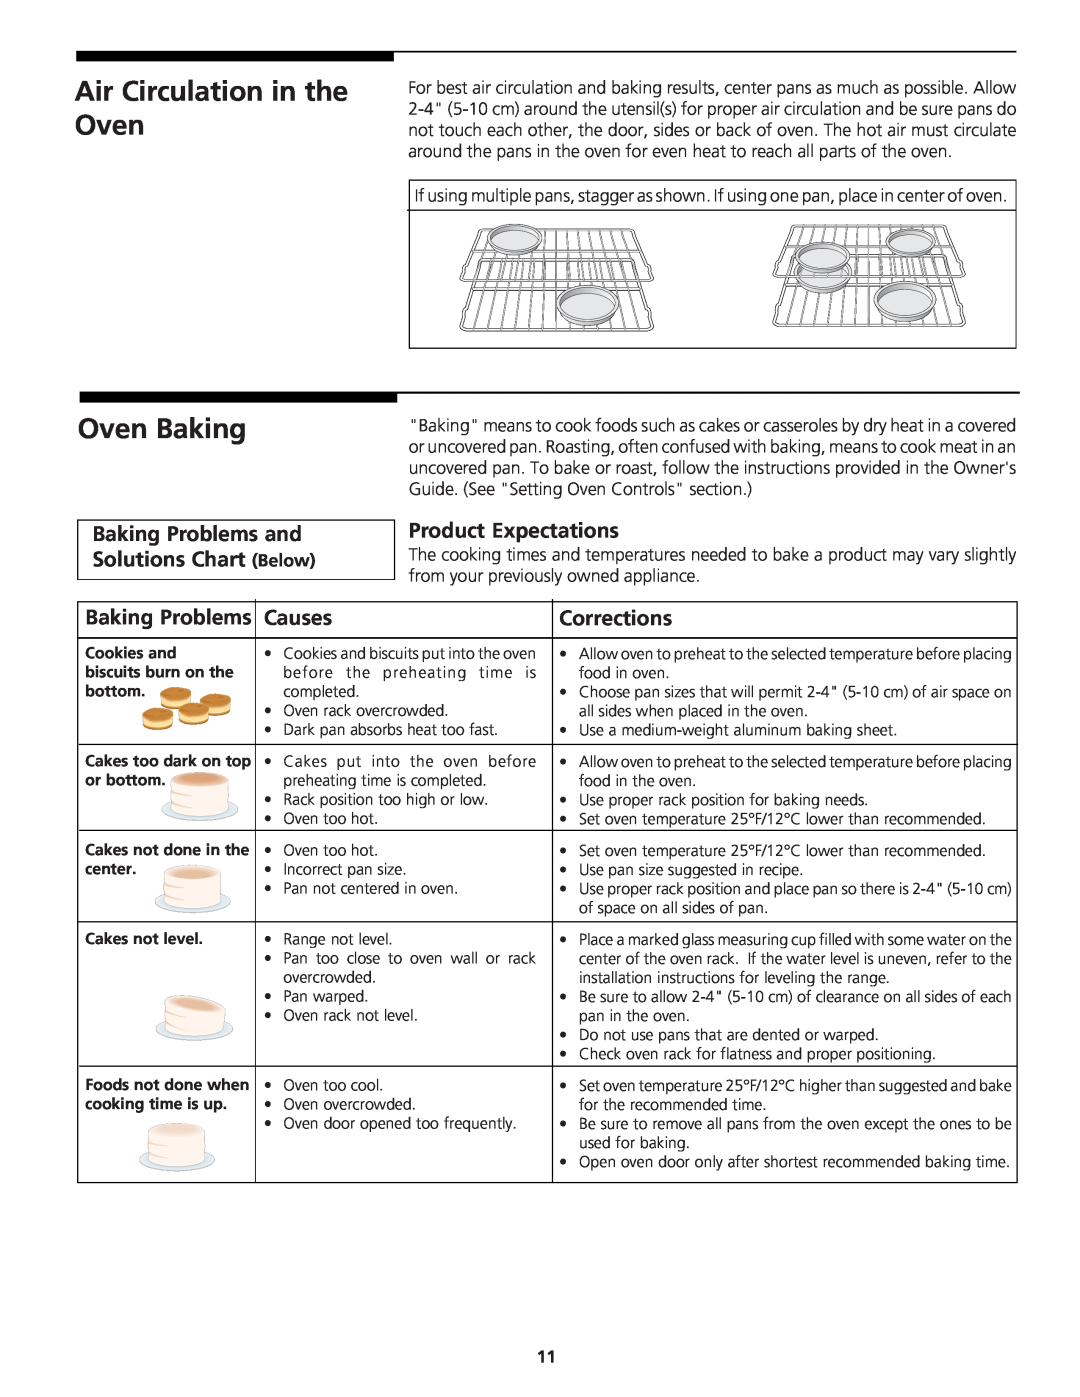 Tappan 318200764 Air Circulation in the Oven Oven Baking, Baking Problems and Solutions Chart Below, Product Expectations 